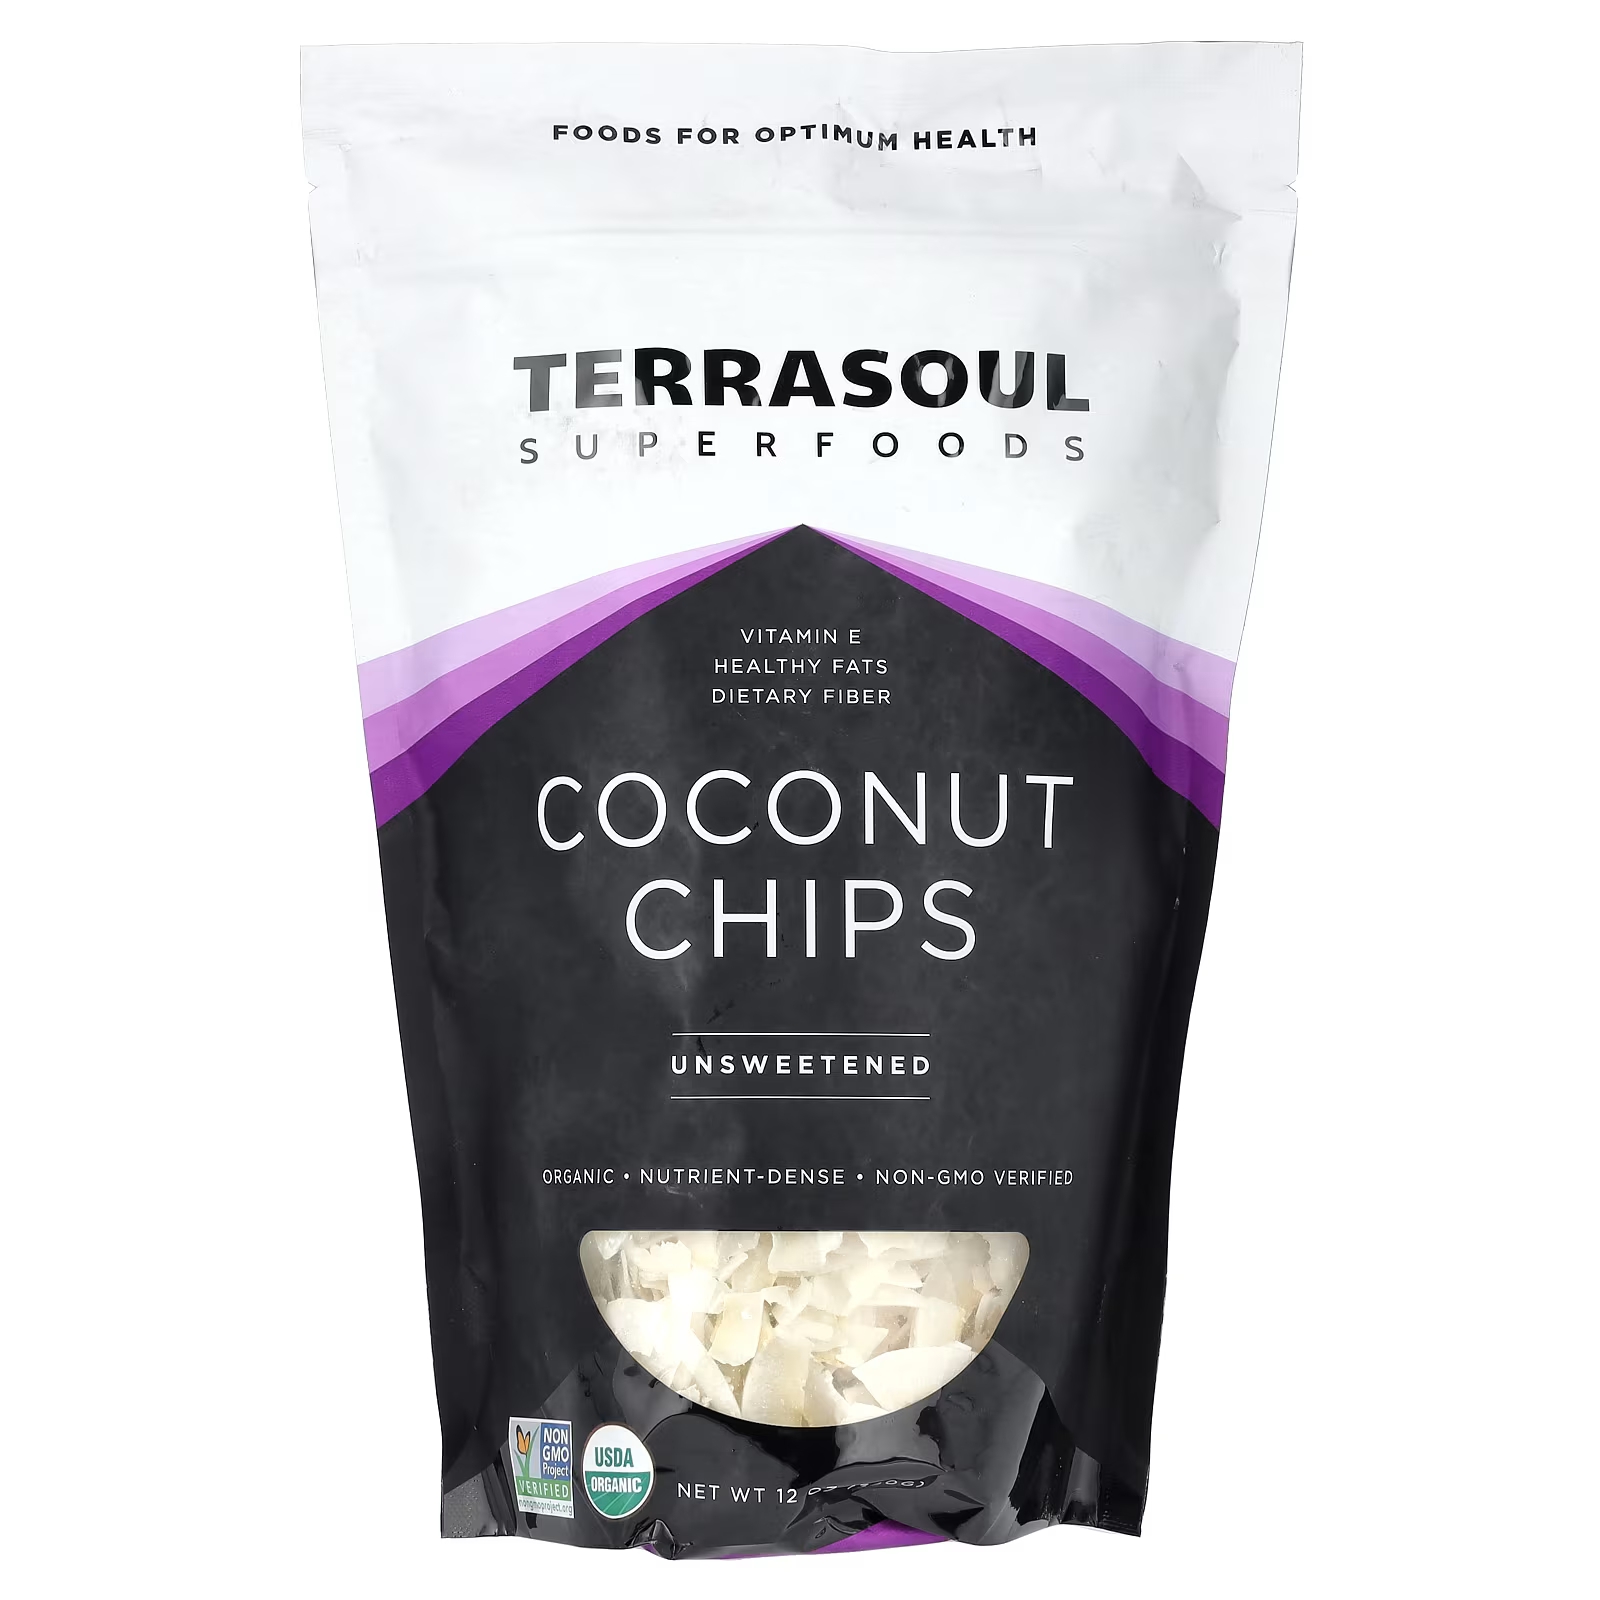 Чипсы Terrasoul Superfoods Coconut Chips Unsweetened, 340 г